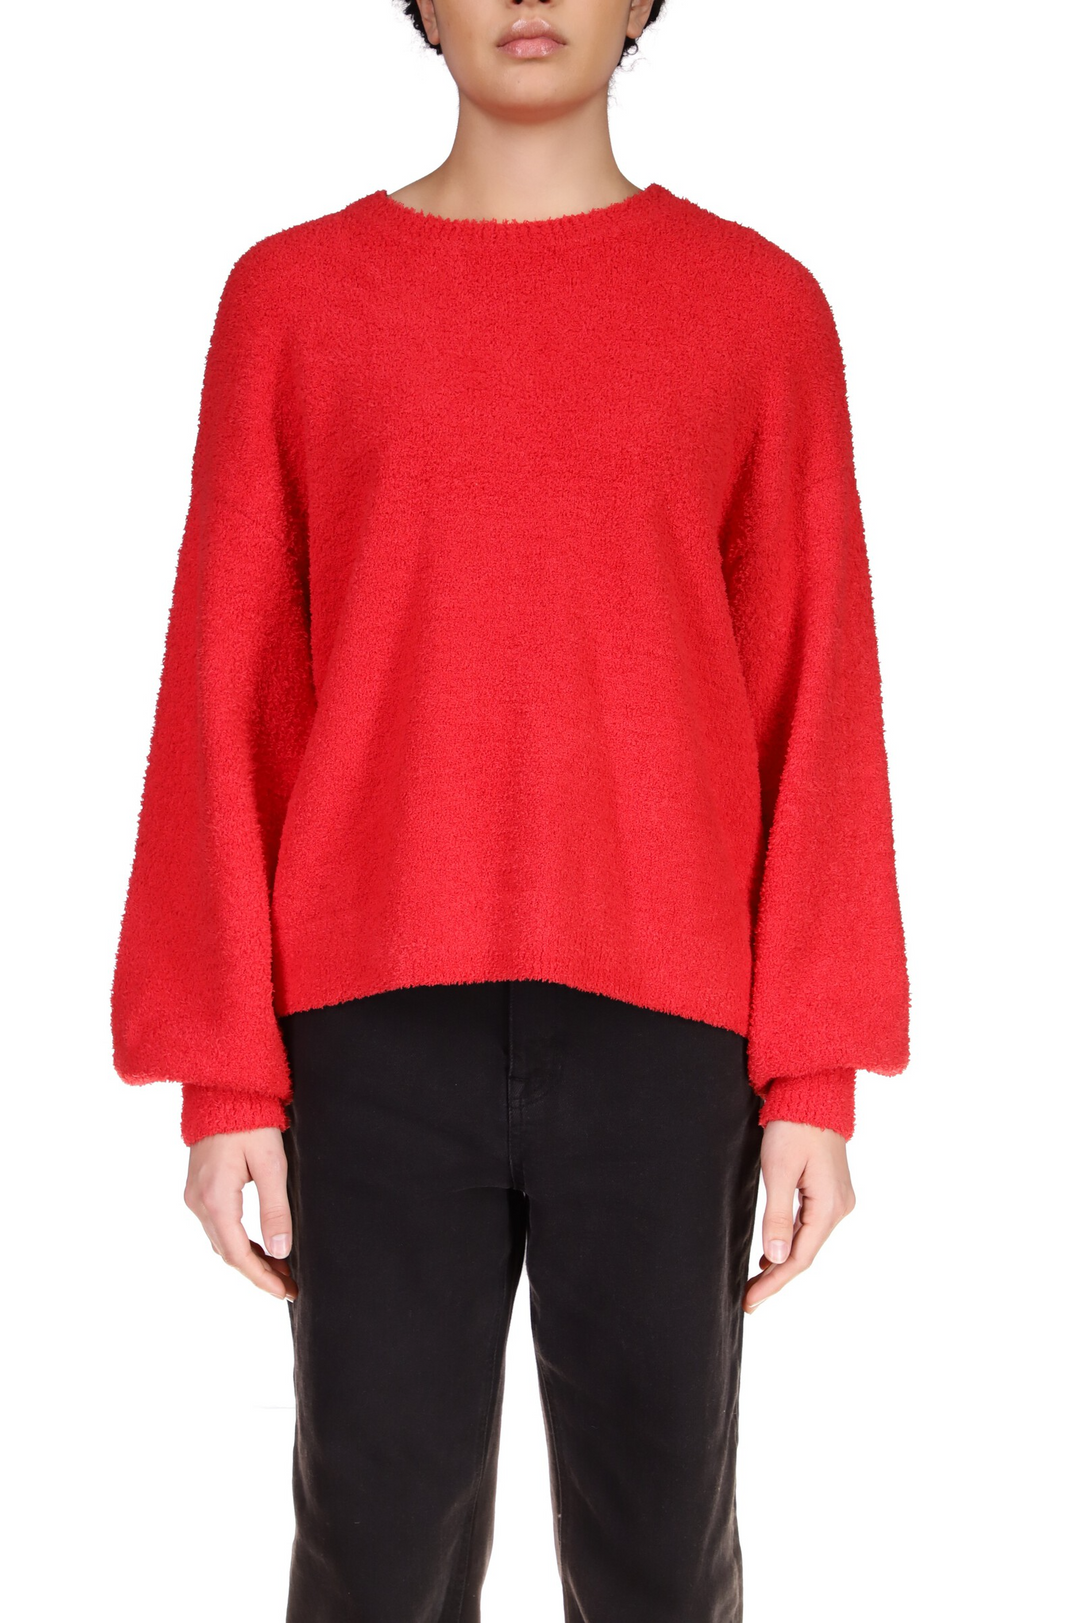 PLUSH VOLUME SLEEVE SWEATER - ROUGE - Kingfisher Road - Online Boutique